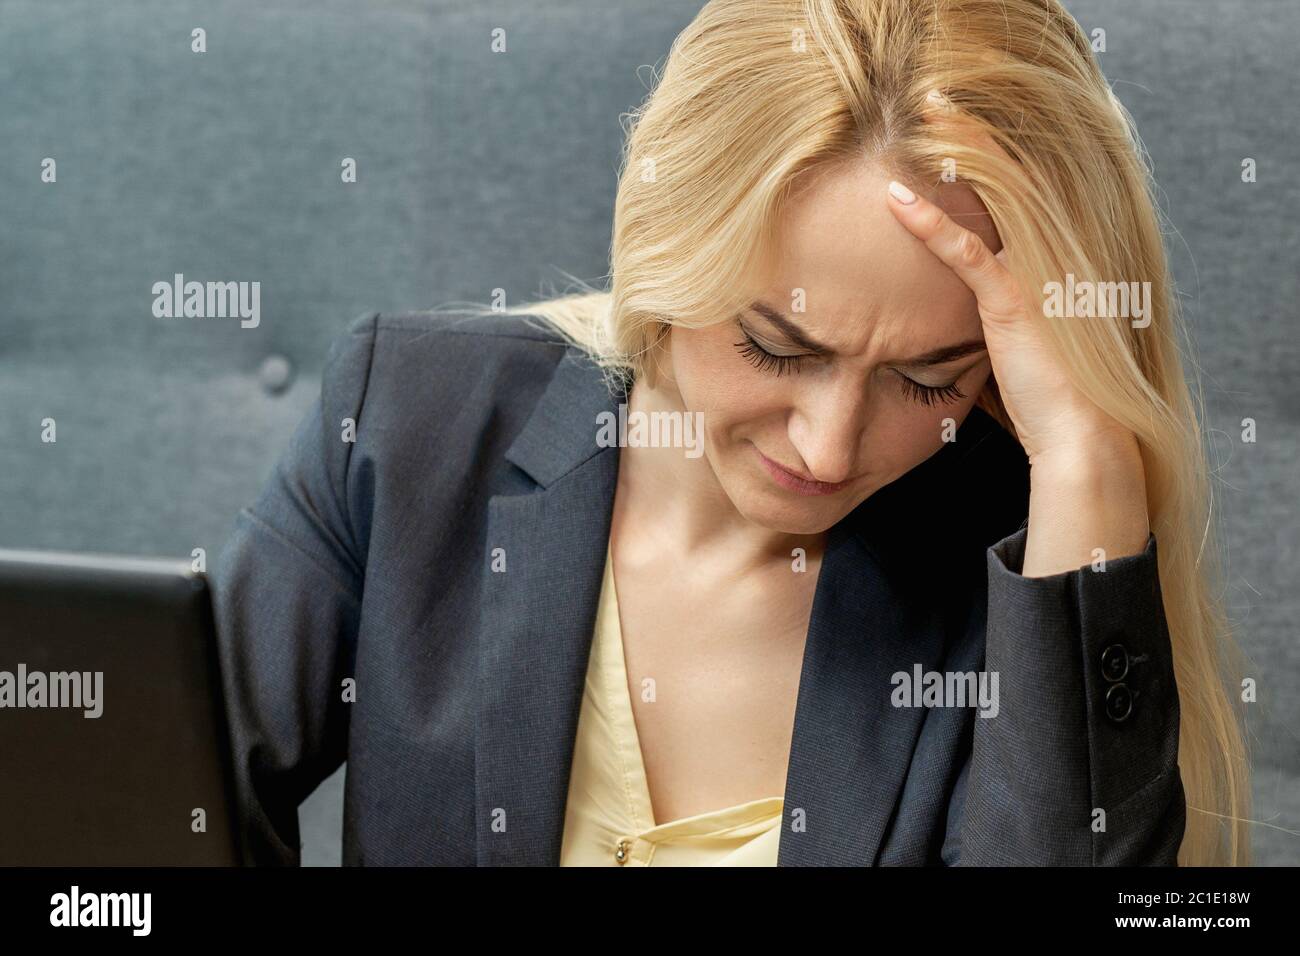 Woman looking surprised while using smartphone at the workplace at home. Stock Photo